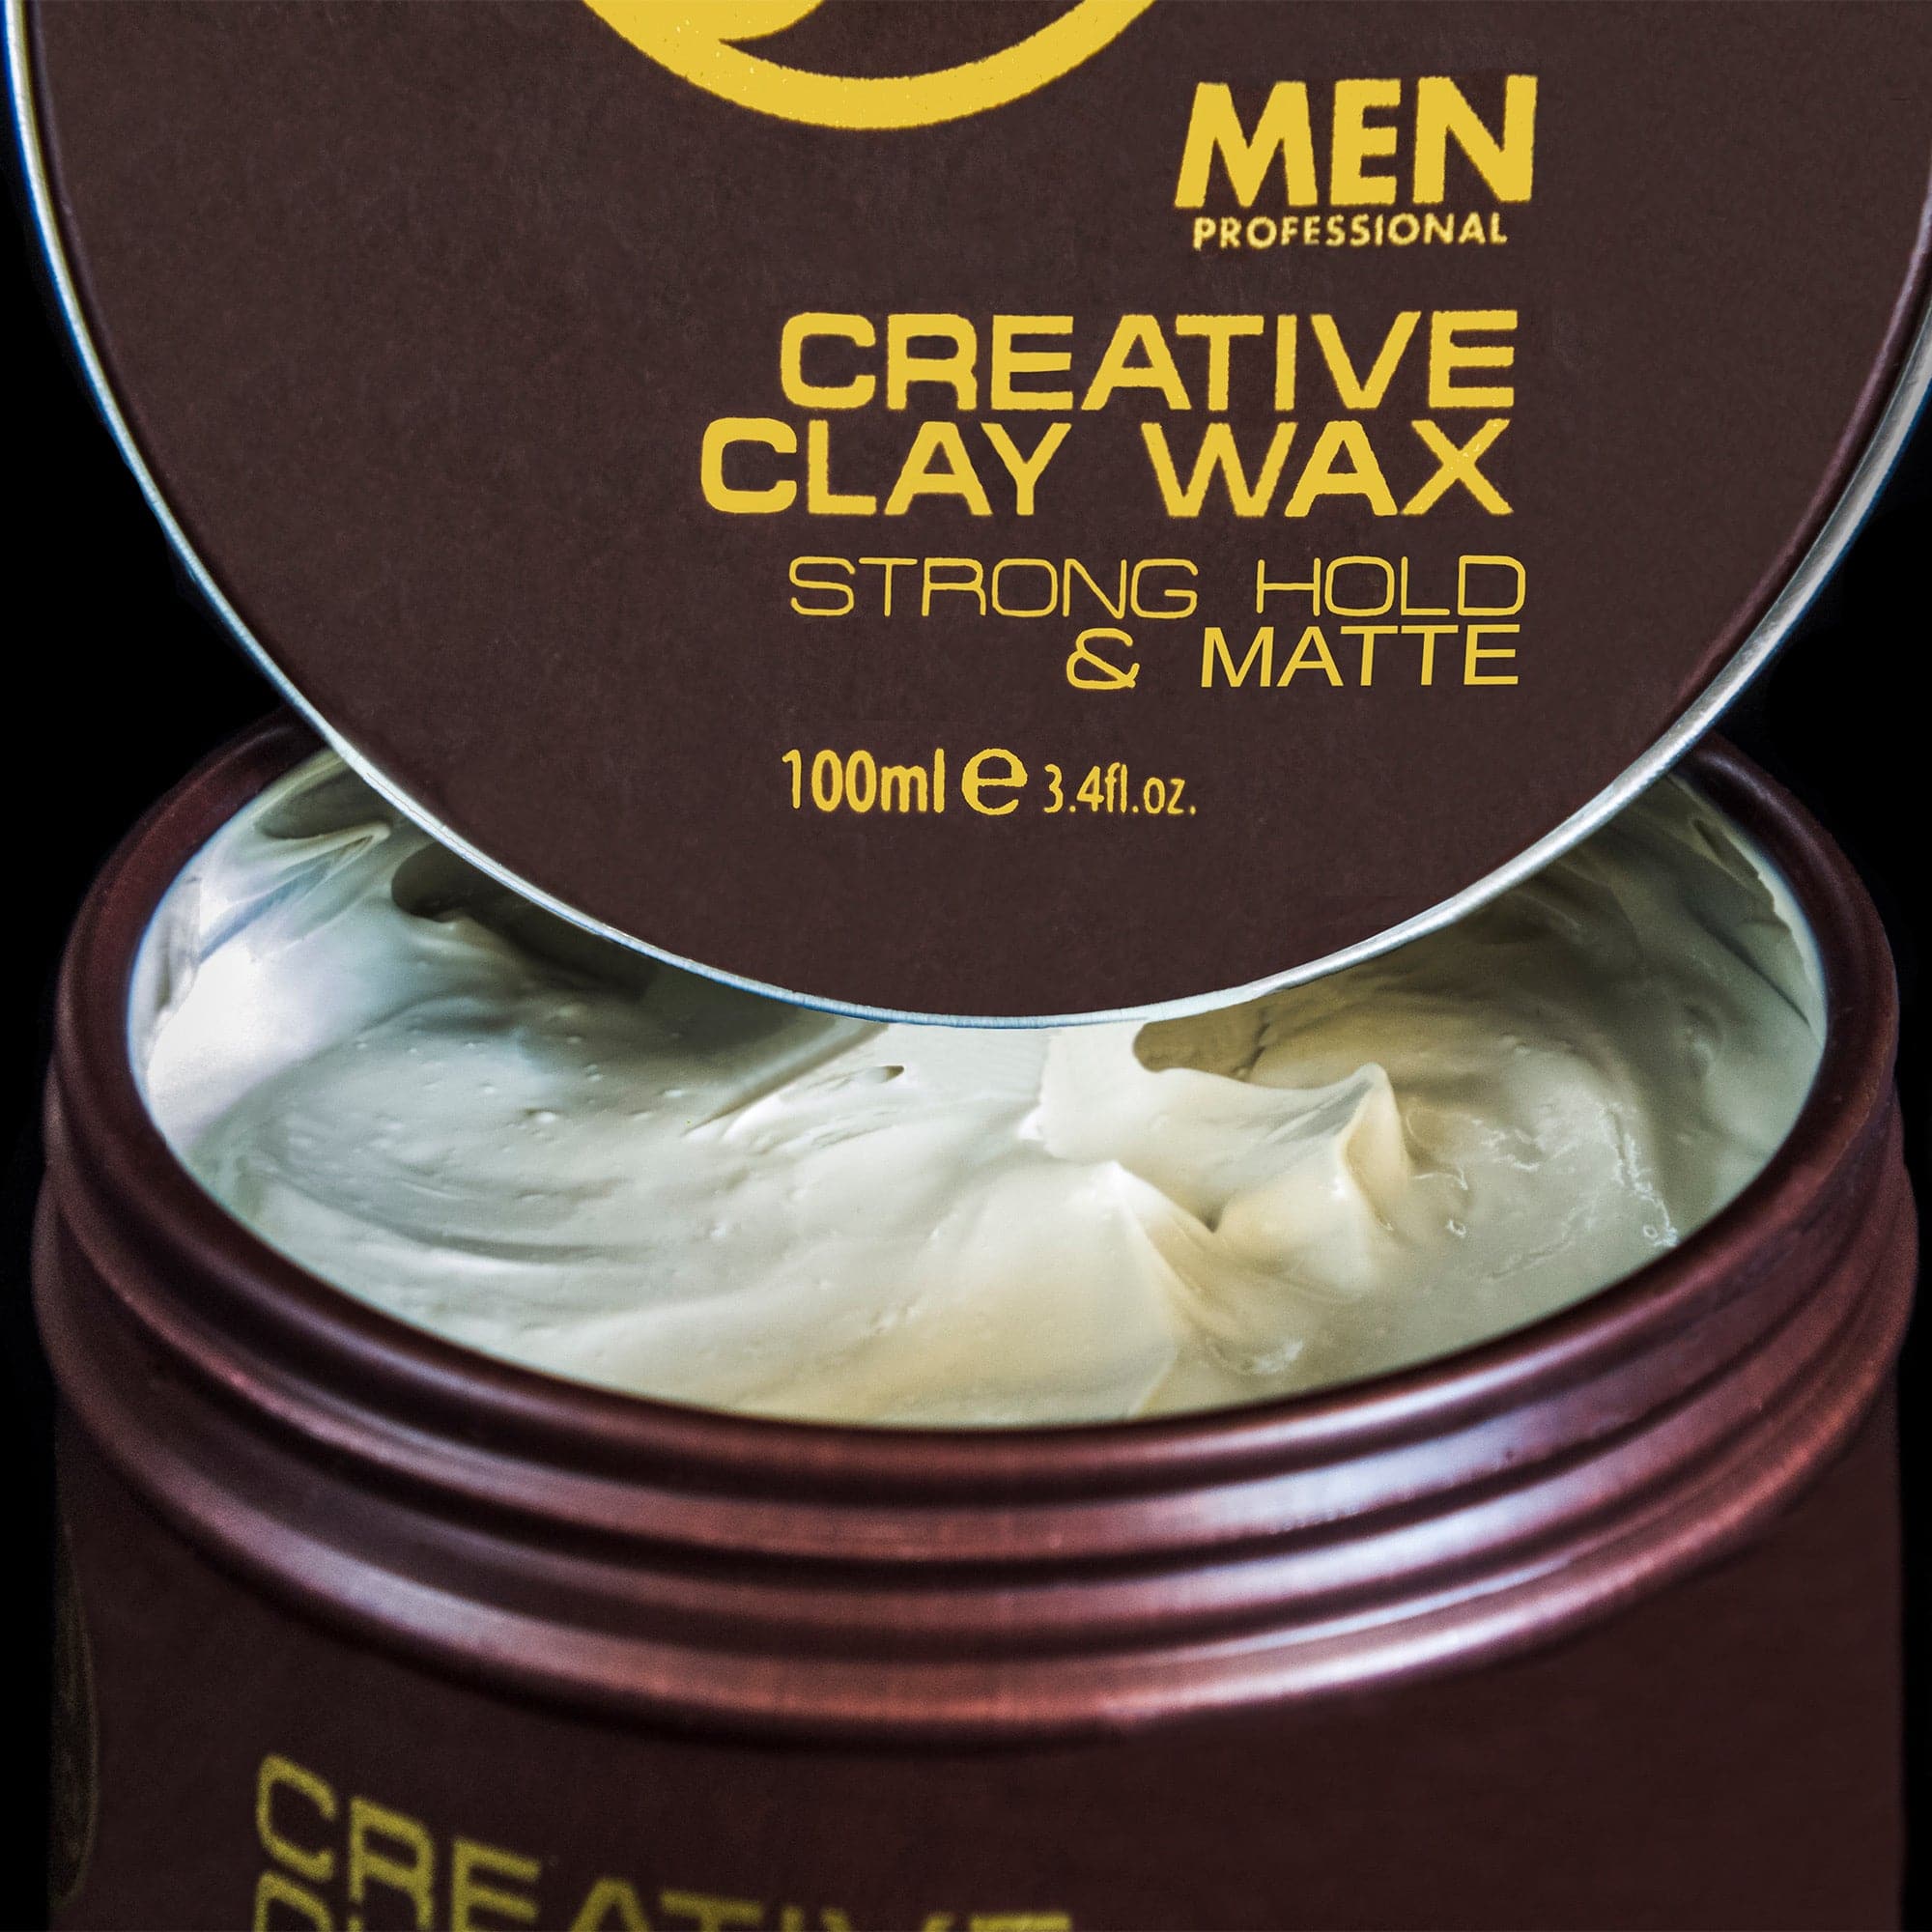 Redone - Creative Clay Wax Strong Hold & Matte 100ml